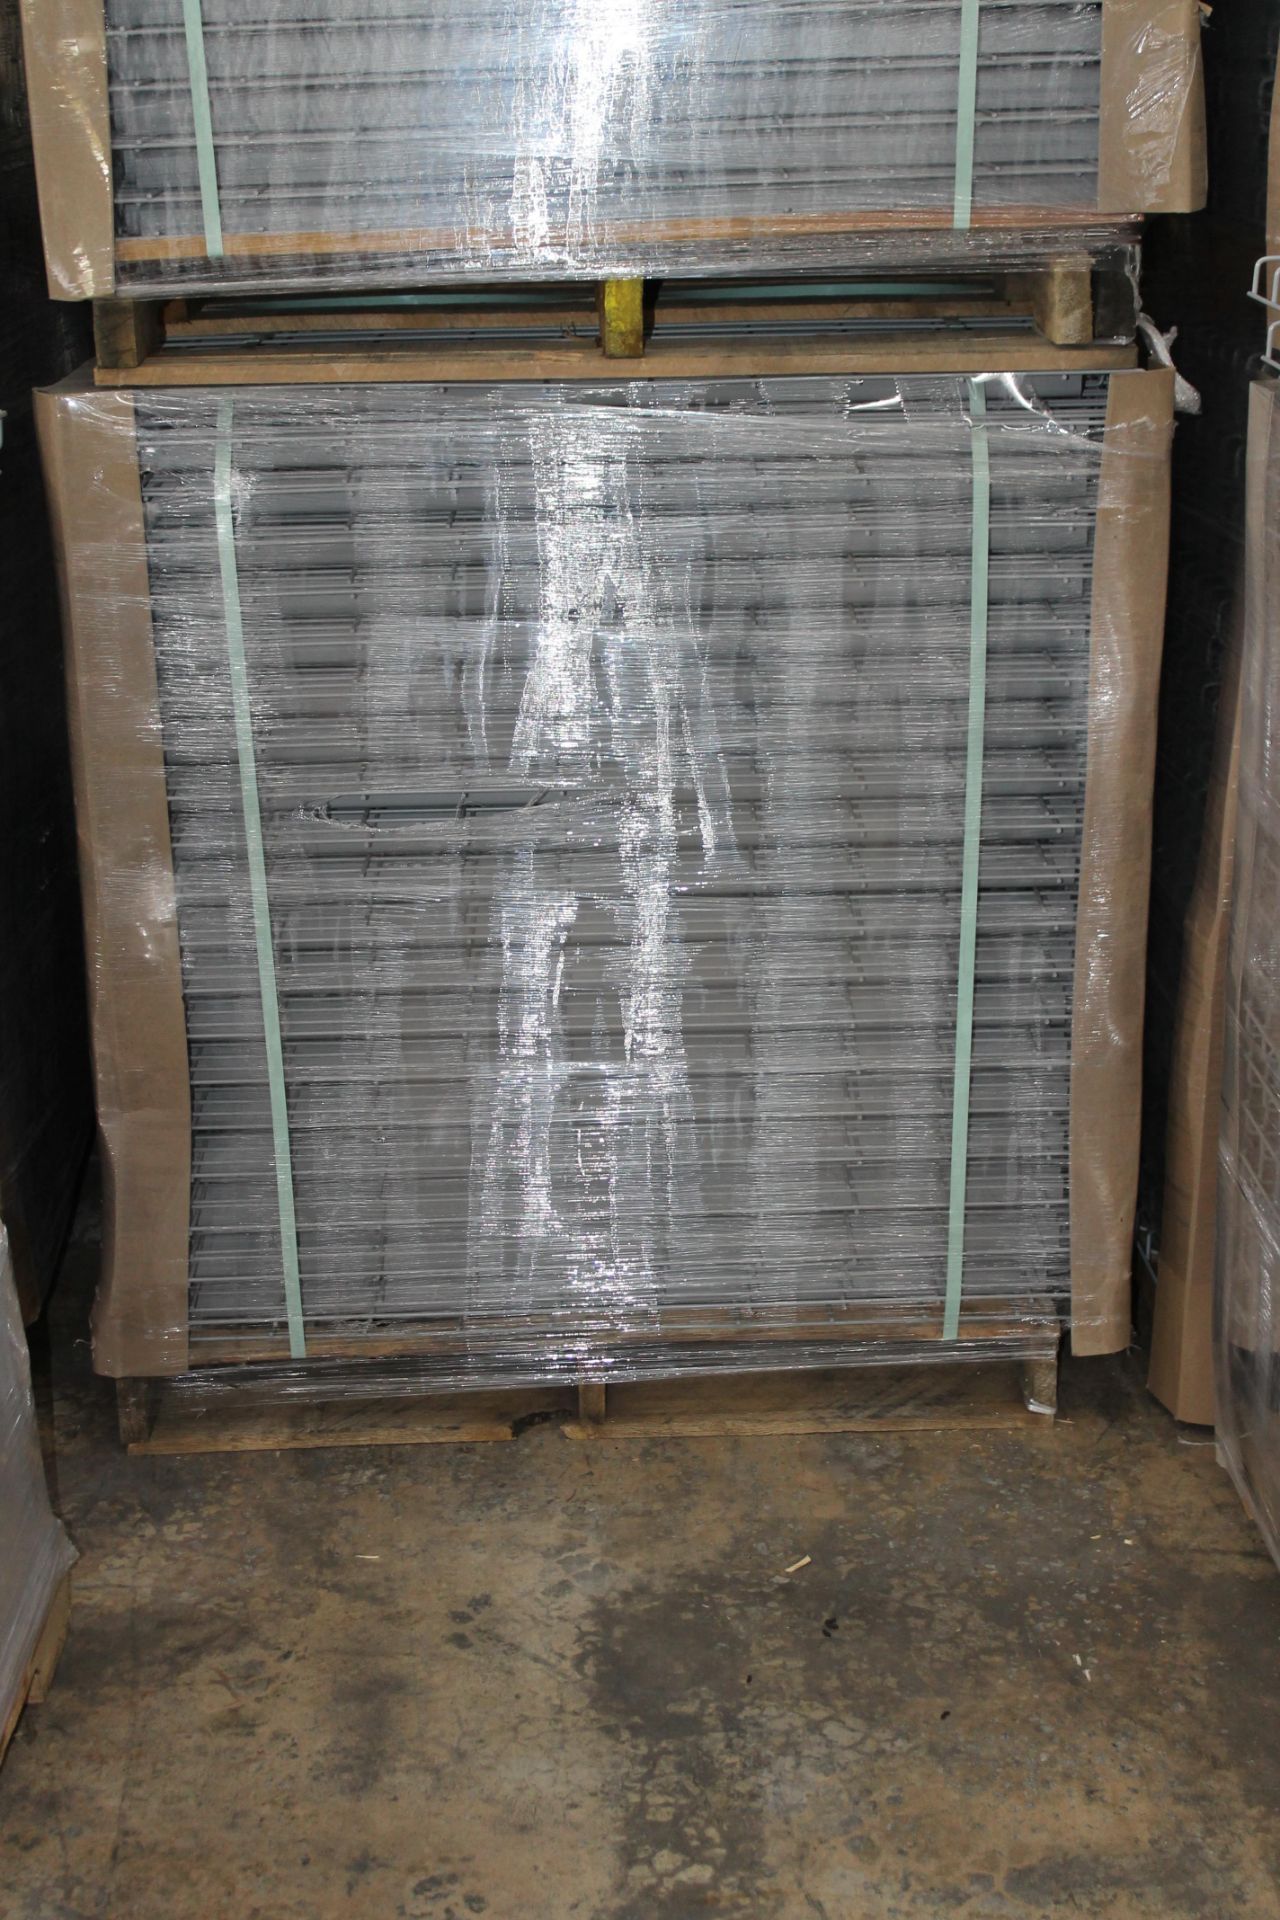 NEW 40 PCS OF STANDRD 42" X 46" WIREDECK - 2200 LBS CAPACITY - Image 2 of 2